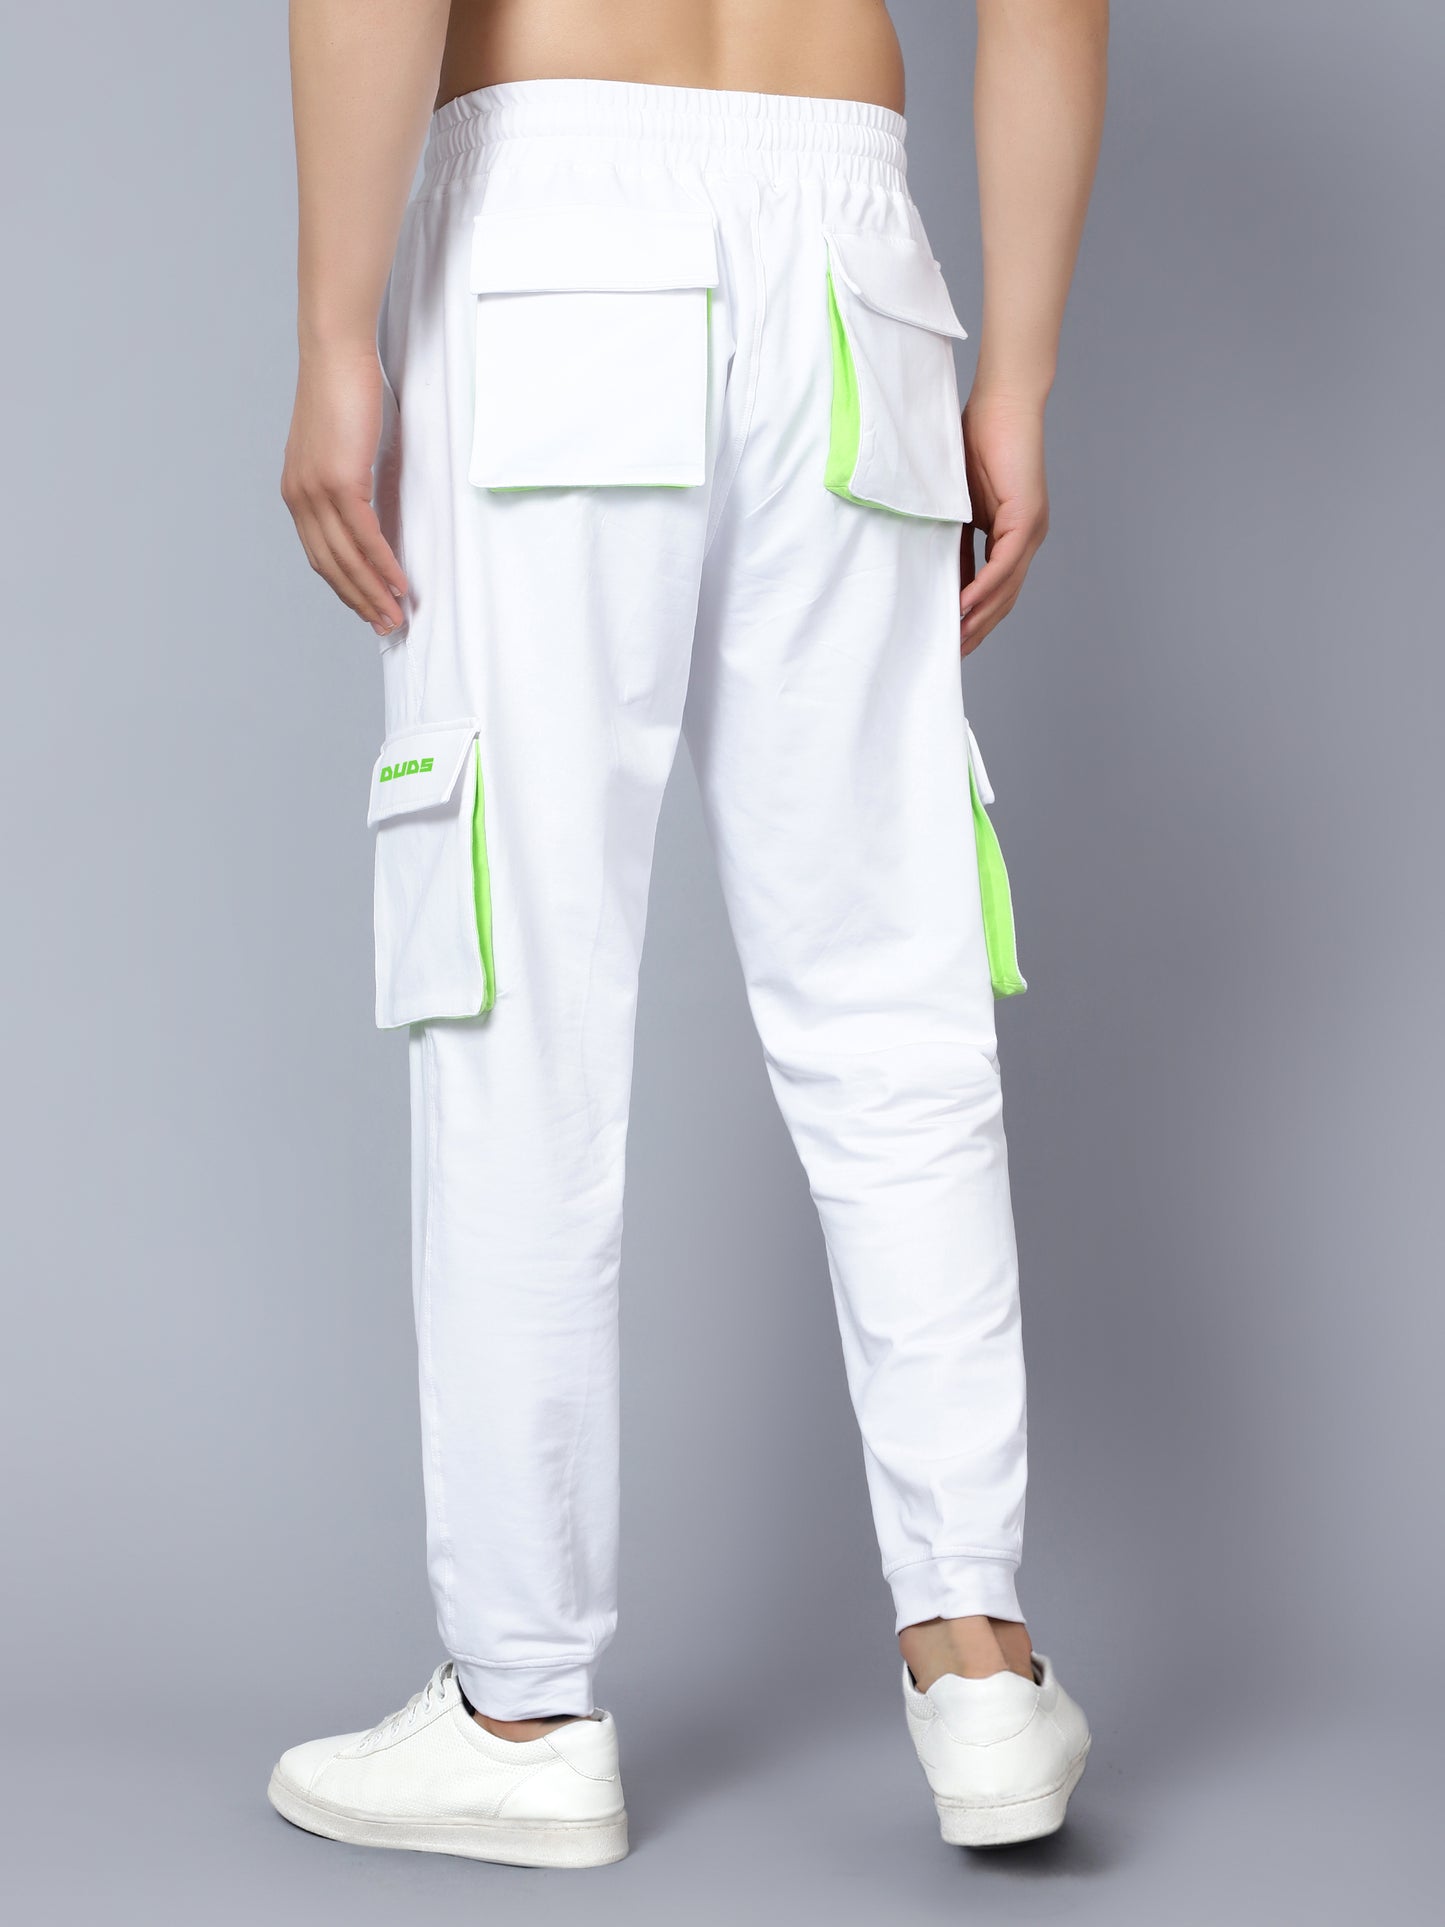 Cargo Pants (White With Neon Green Highlighter) - Wearduds